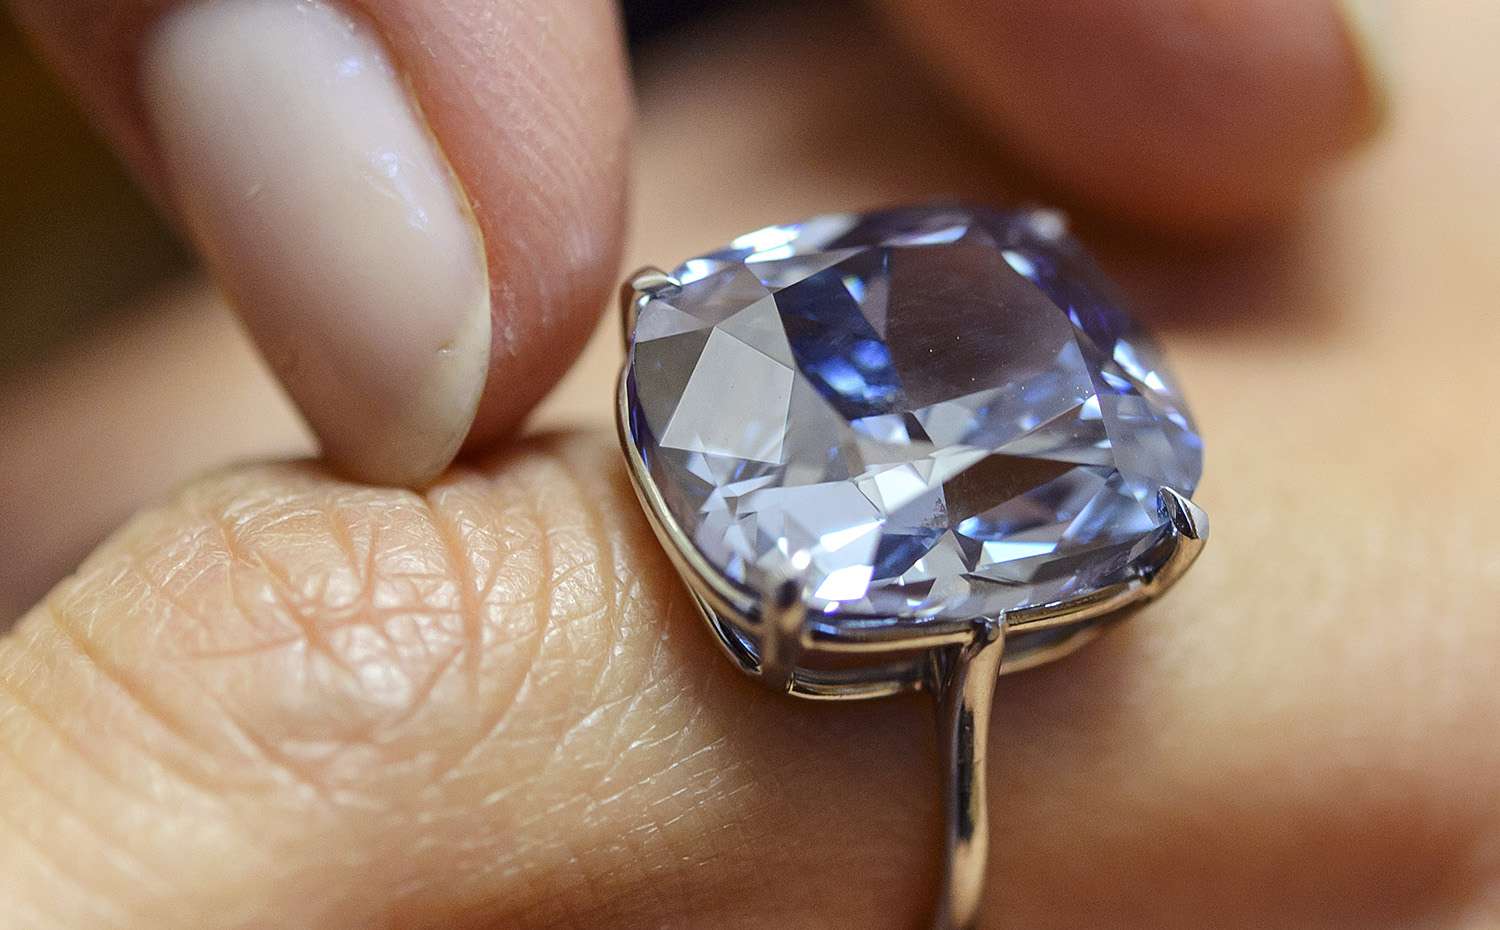 A Chinese customer claims she lost a diamond ring and pendant together worth 300,000 yuan after the contents of an express delivery parcel went missing. File photo: AP